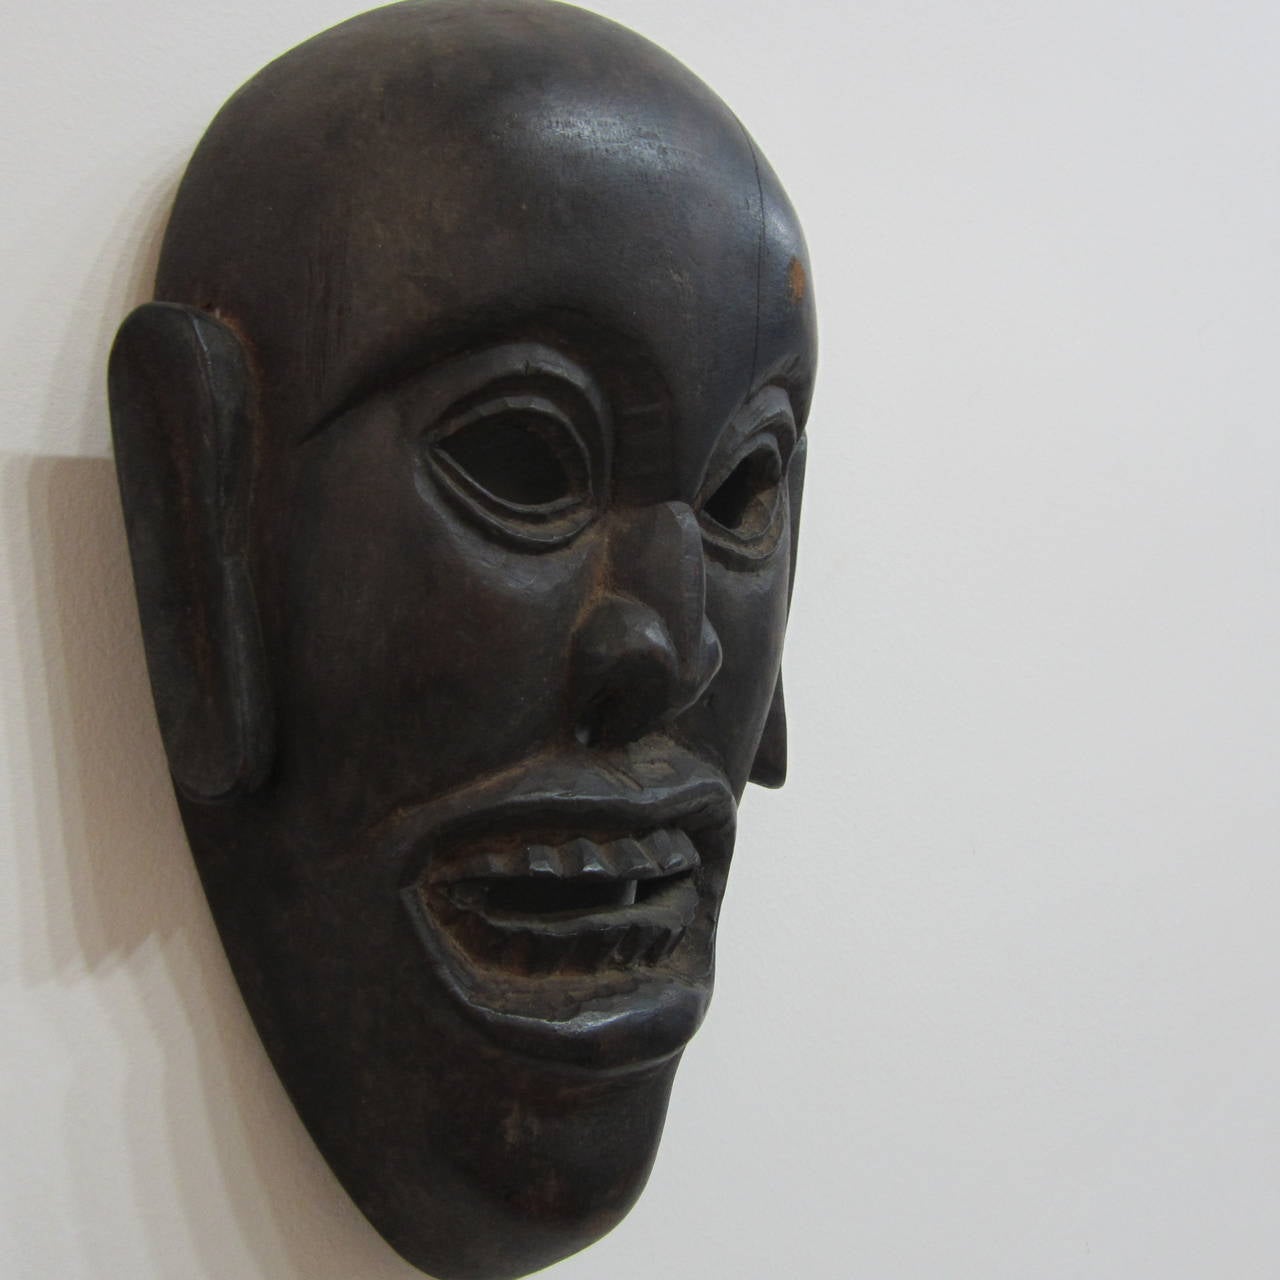 Hand-carved wood mask from West Africa from mid-20th century.